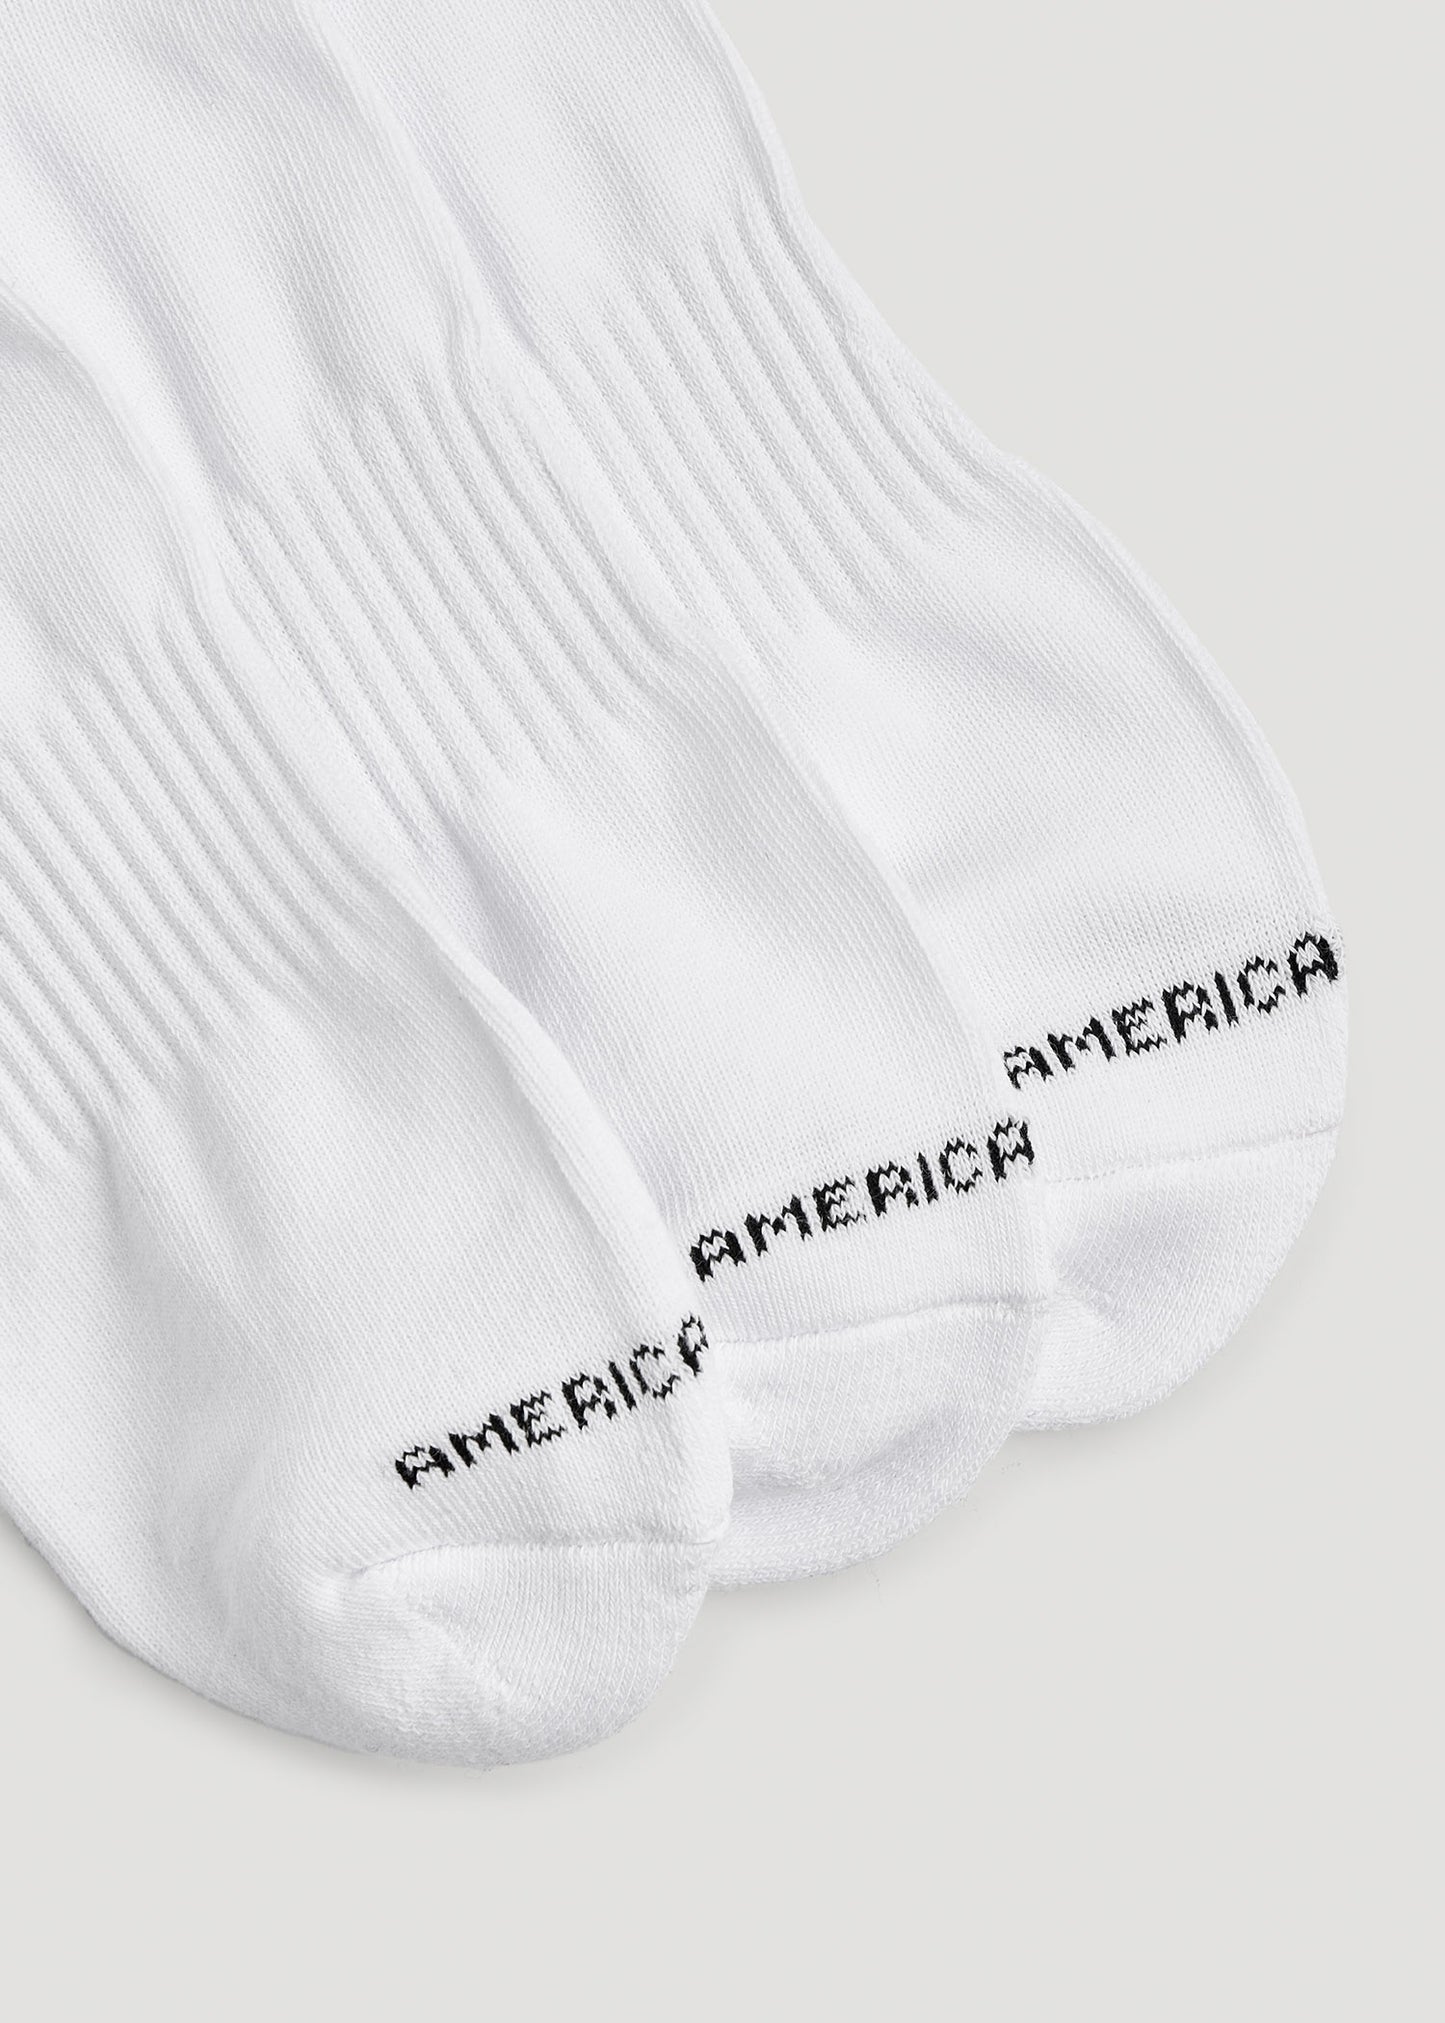    American-Tall-Mens-Athletic-Crew-Socks-X-Large-Size-14-17-White-3-Pack-Detail